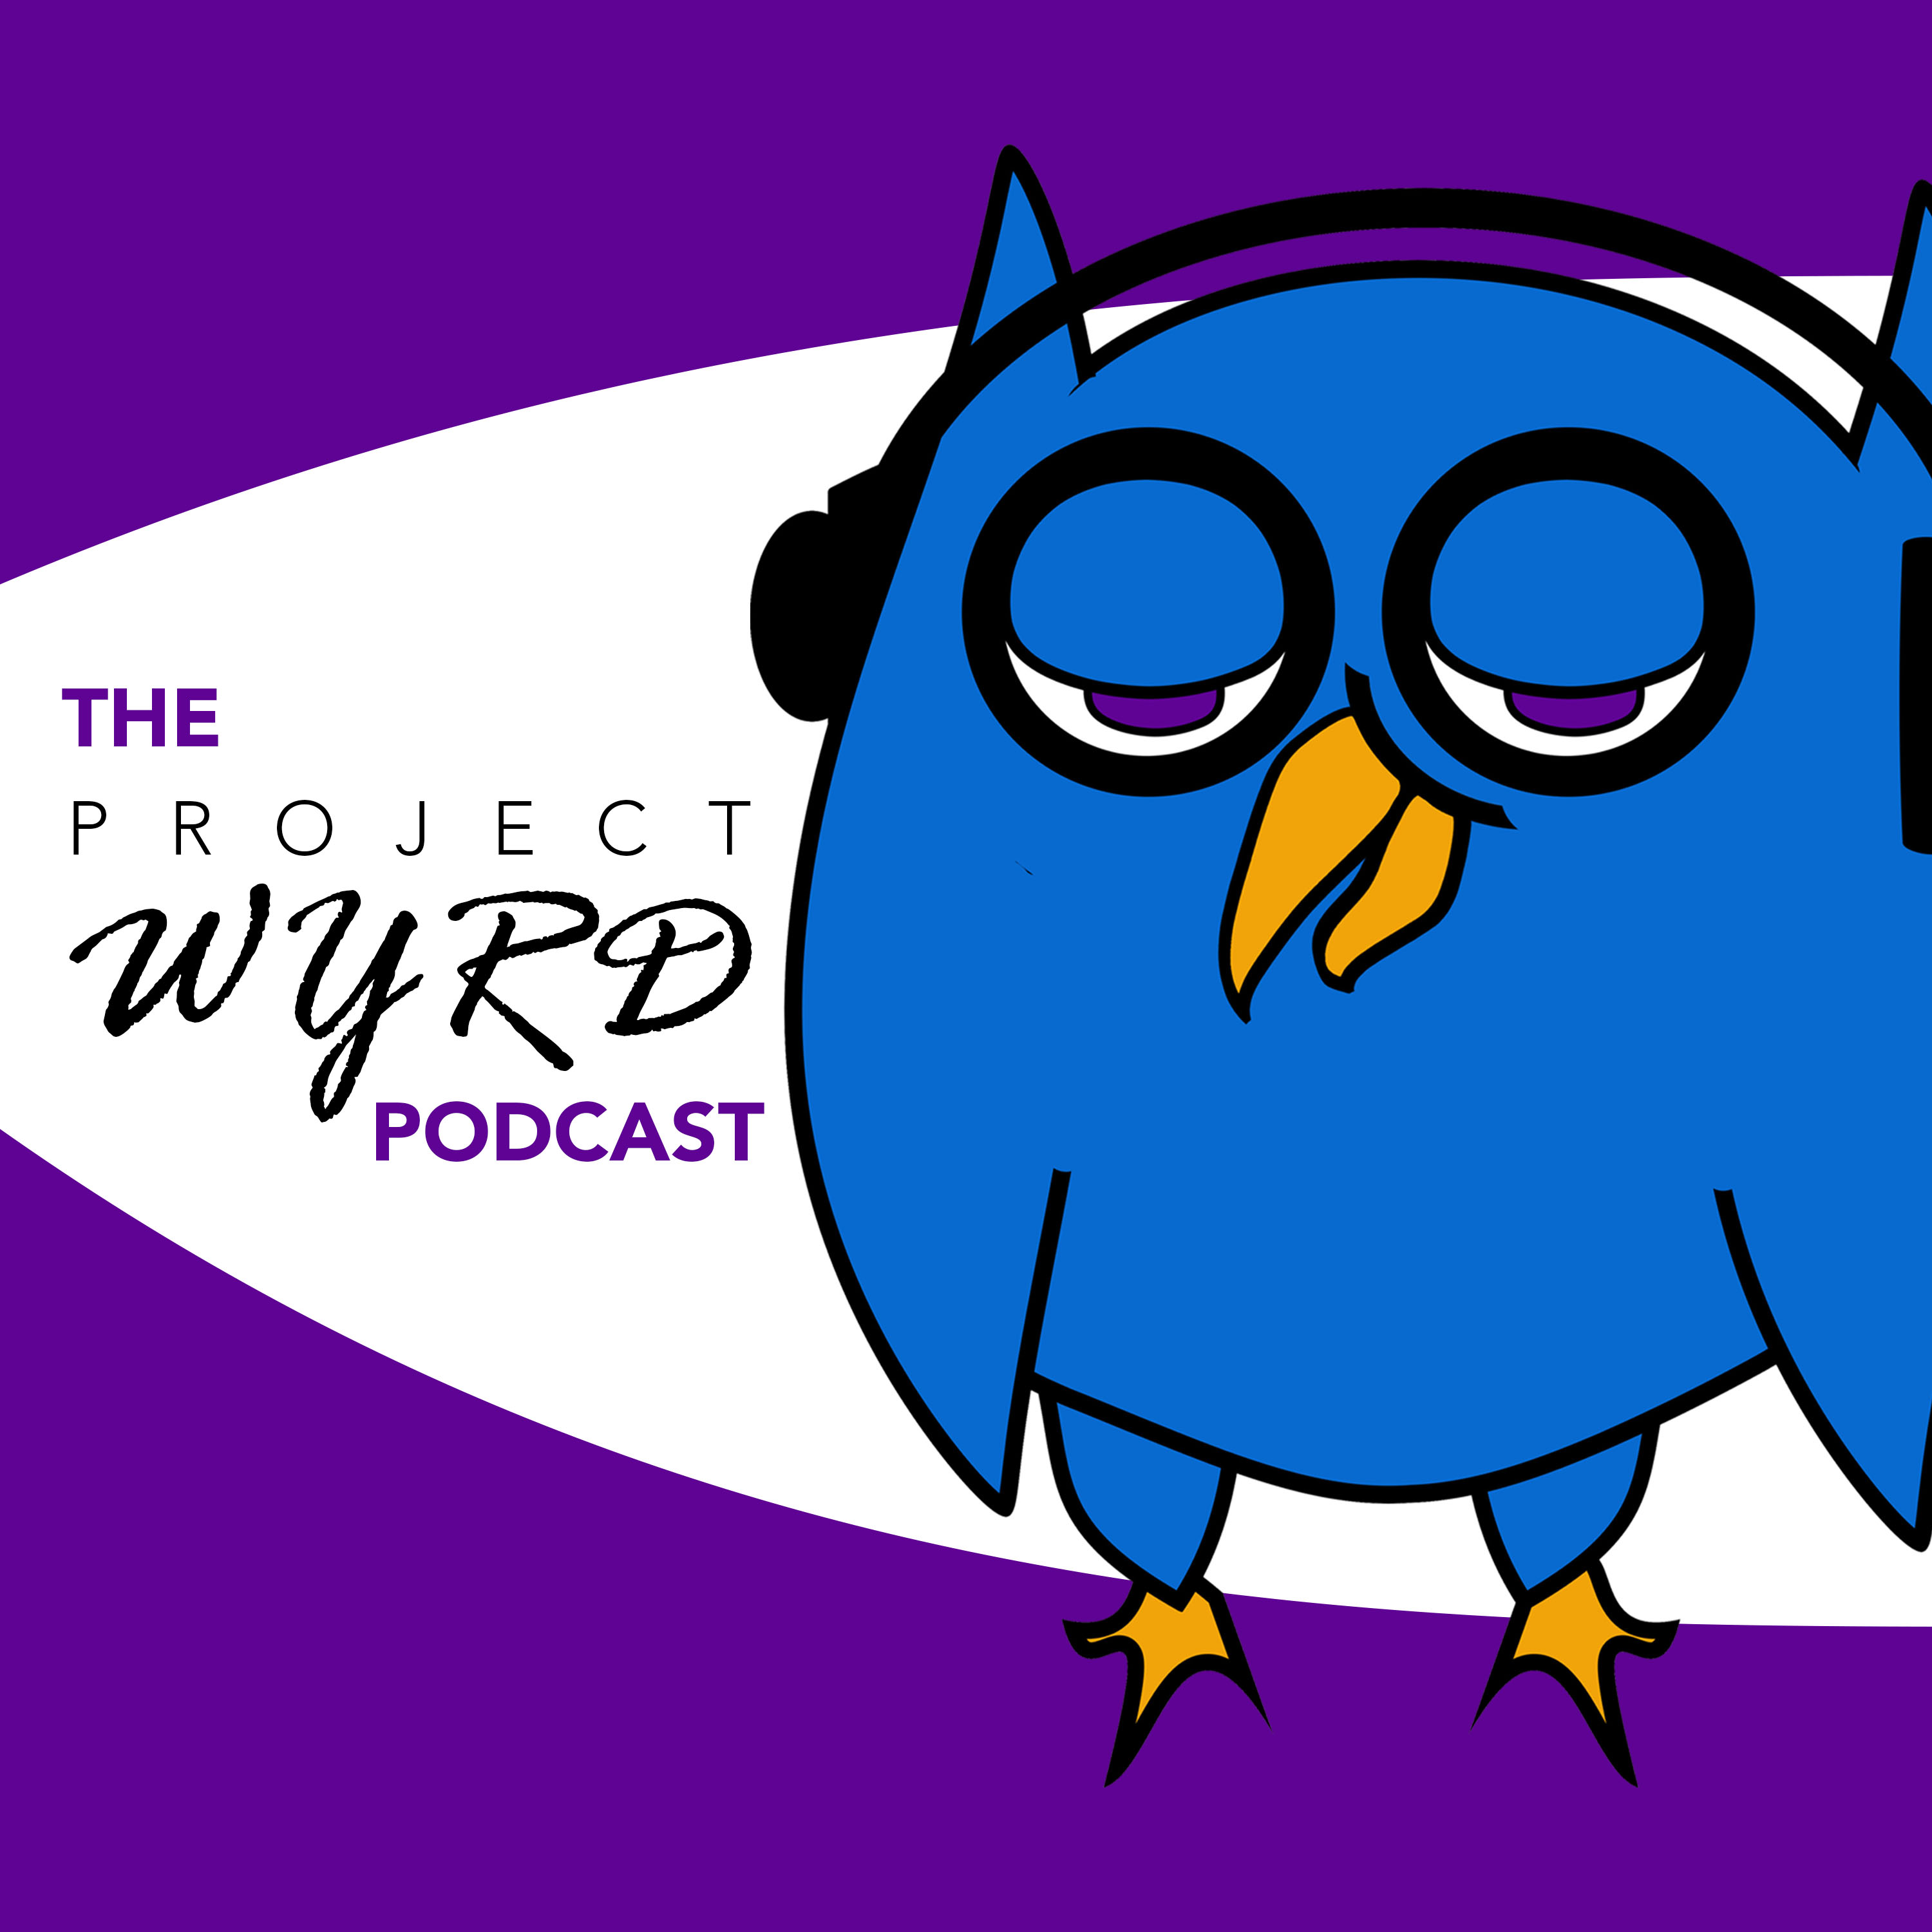 The Project WYRD Podcast